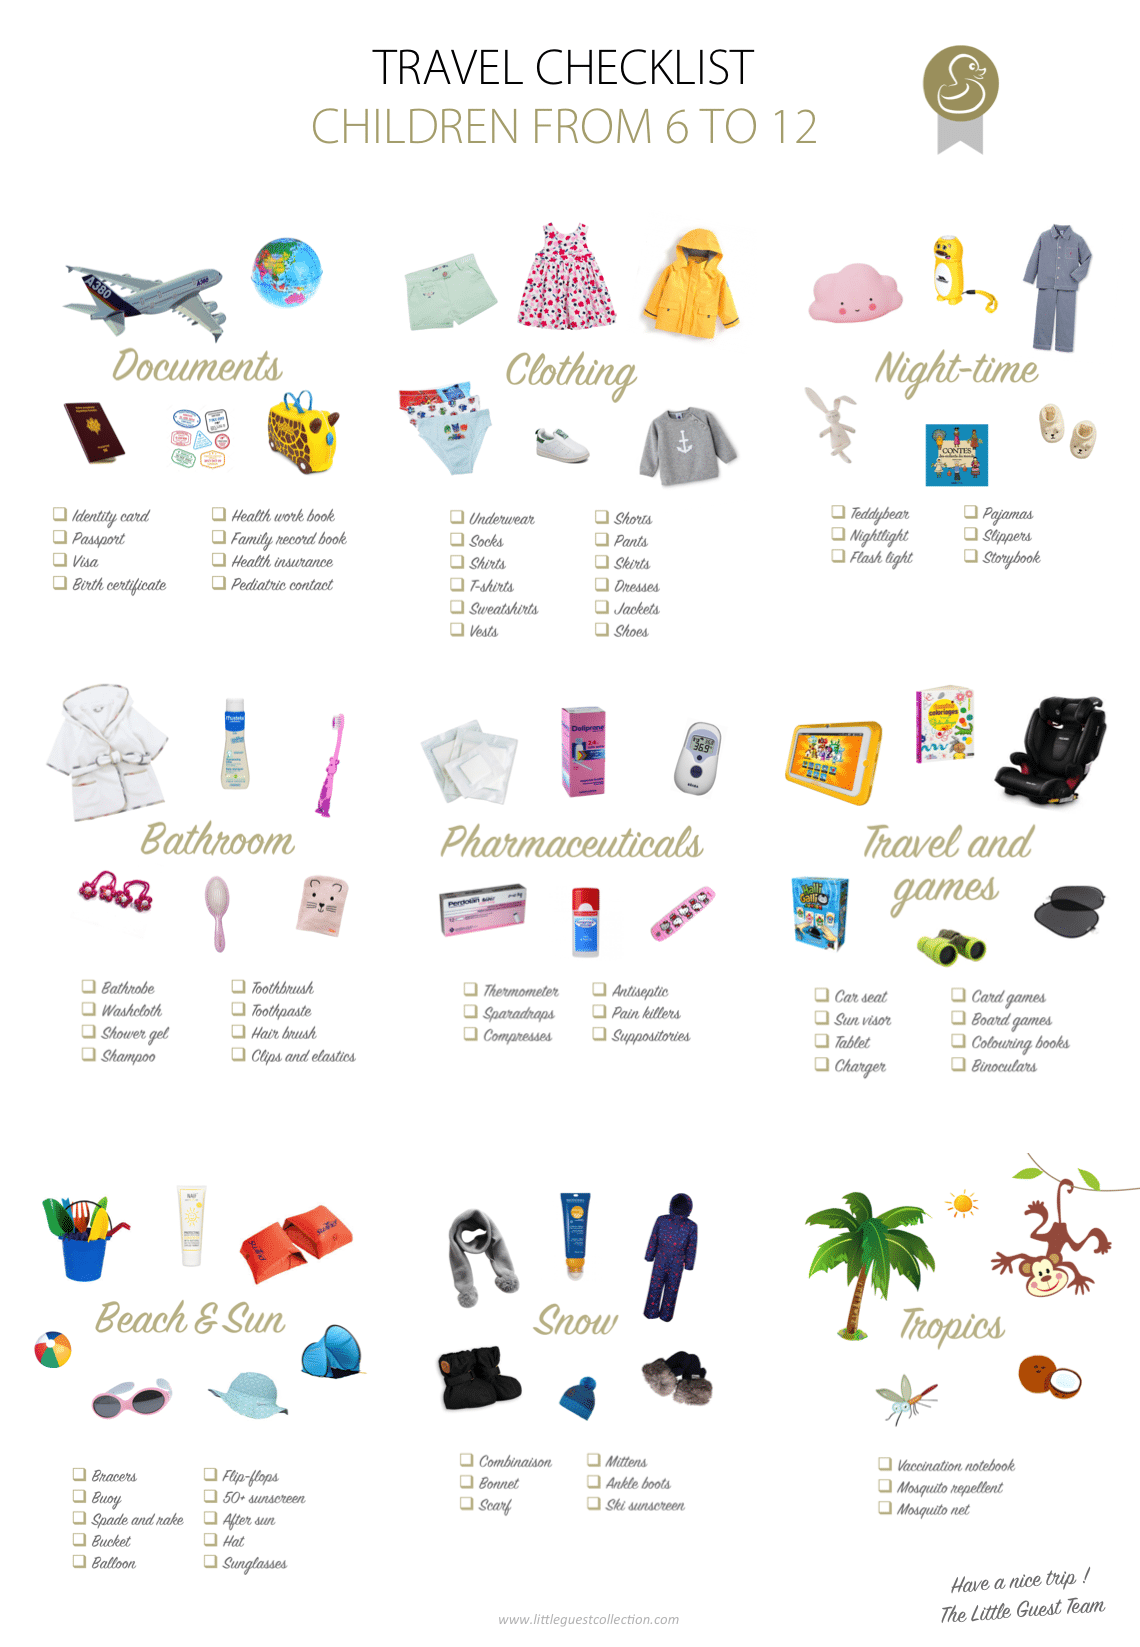 Travel checklist for children from 6 years, 7 years, 8 years, 9 years, 10 years, 11 years to 12 years (documents, clothing, night-time, bathroom, meals, pharmaceuticals, travel, games, sun, beach, tropics et snow)